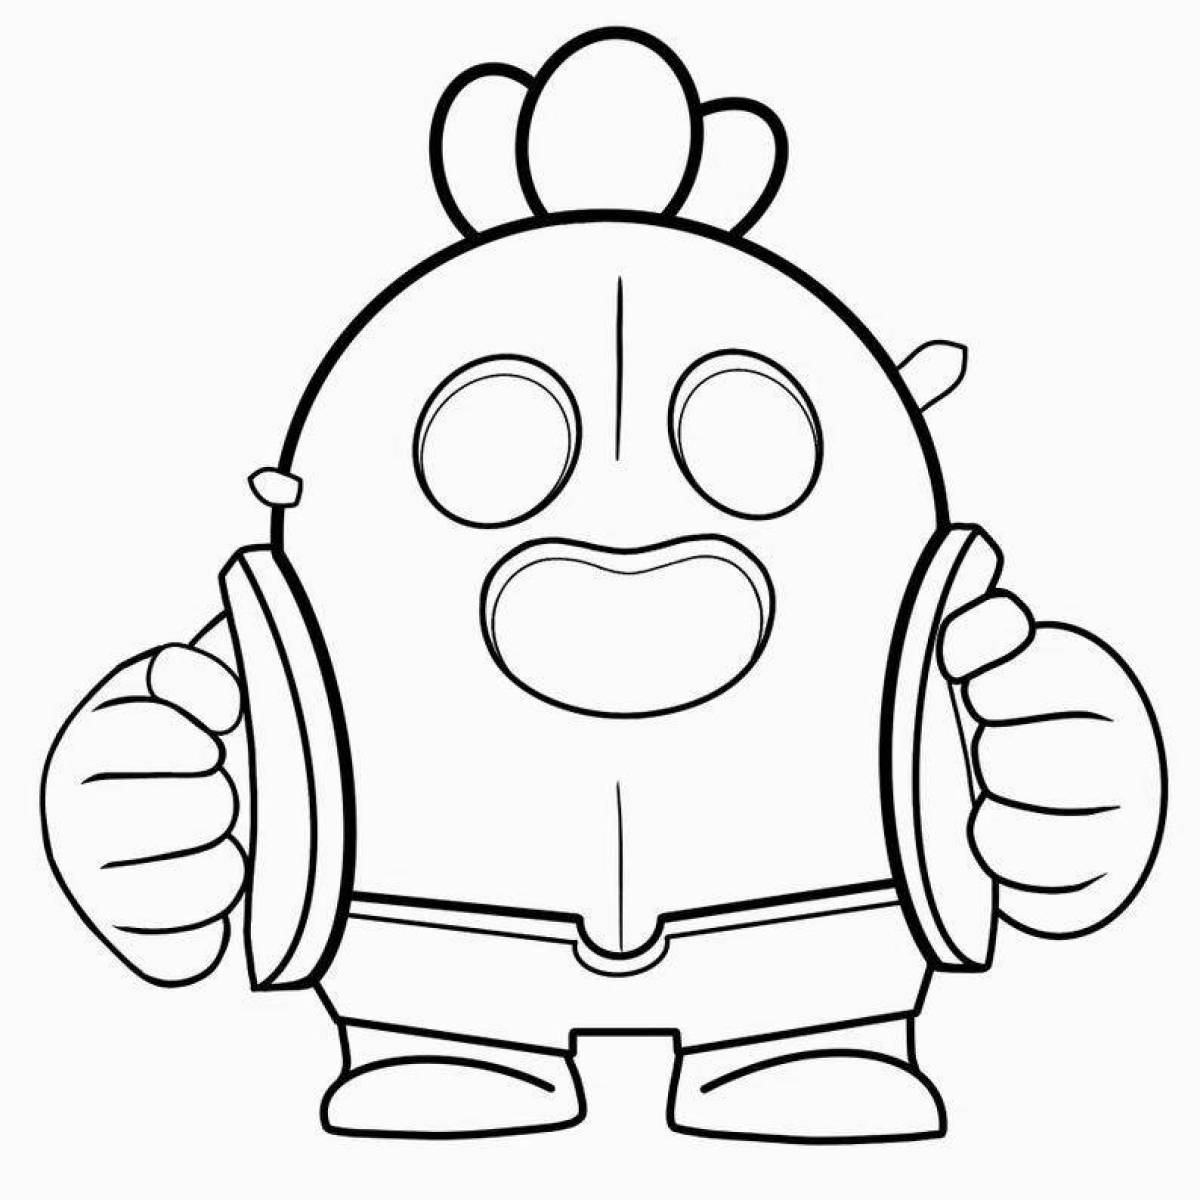 Glorious pablo coloring page